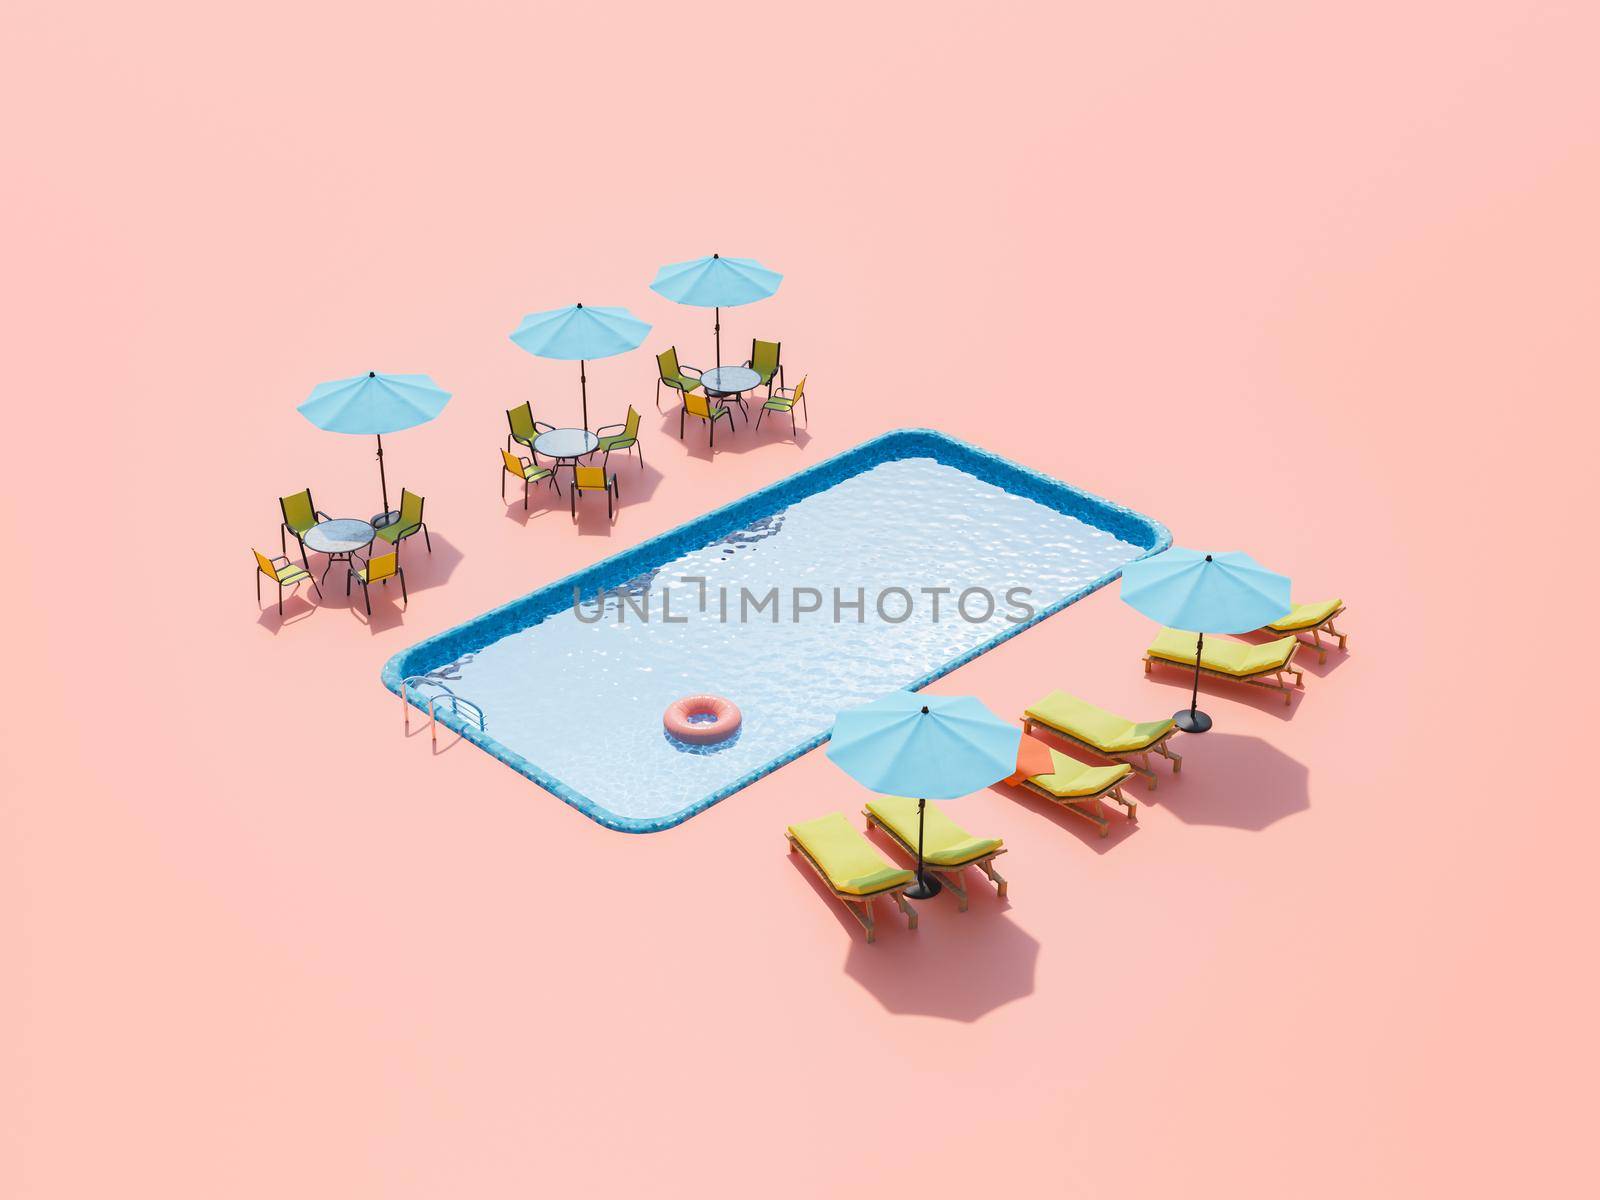 High angle 3D rendering of sunbeds with umbrellas and round tables with chairs placed near outdoor swimming pool on pink background